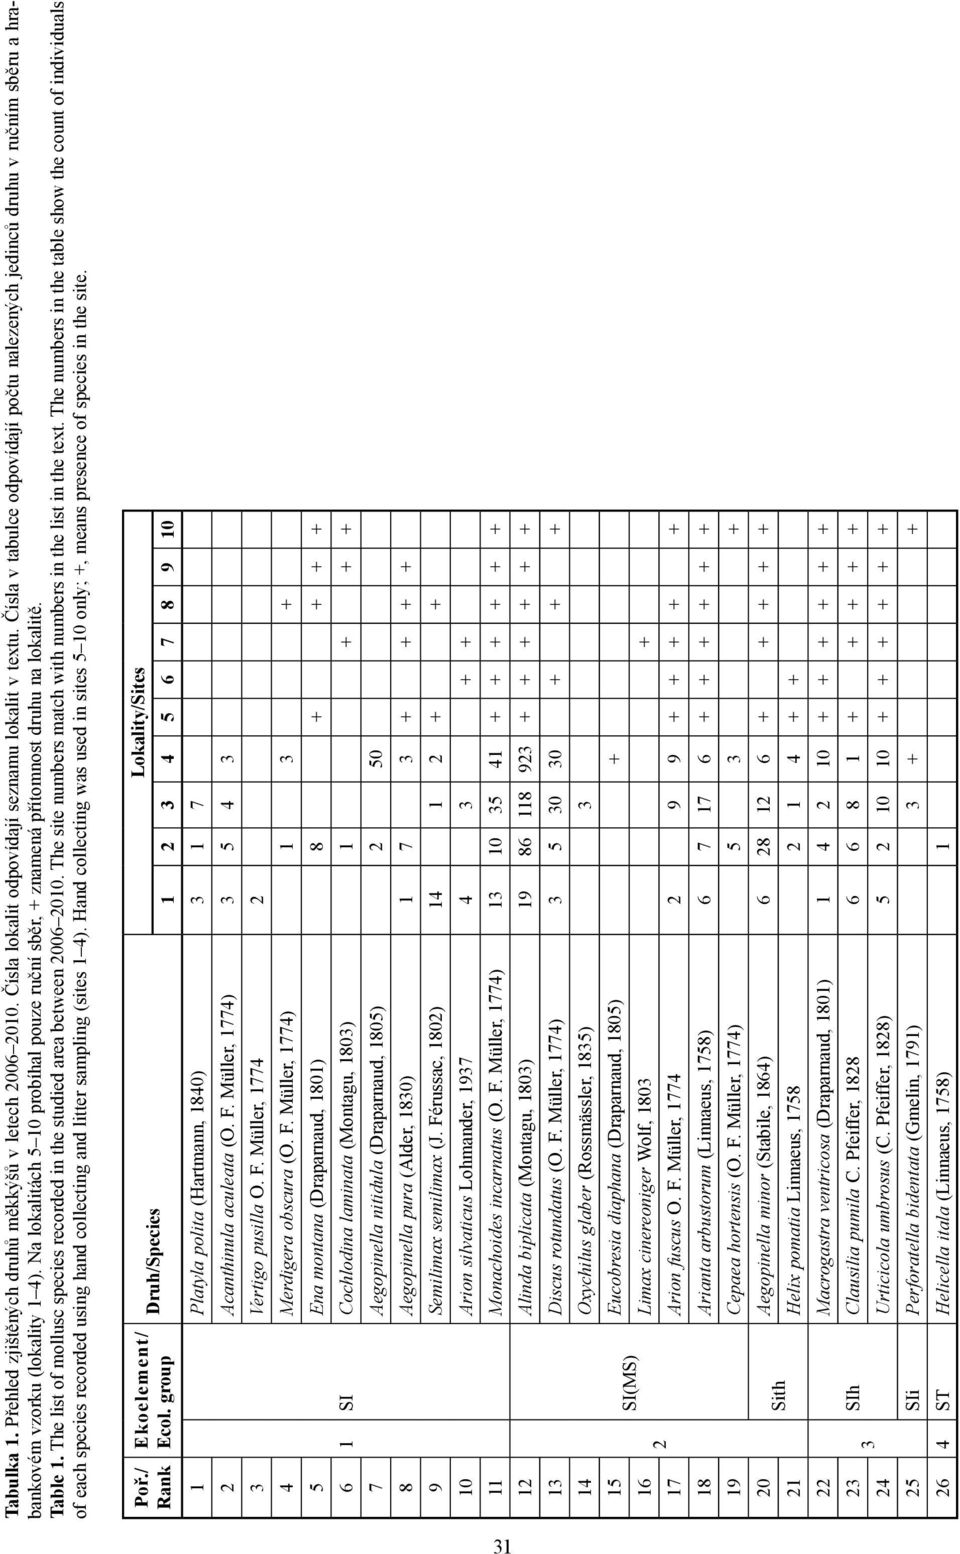 Table 1. The list of mollusc species recorded in the studied area between 2006 2010. The site numbers match with numbers in the list in the text.